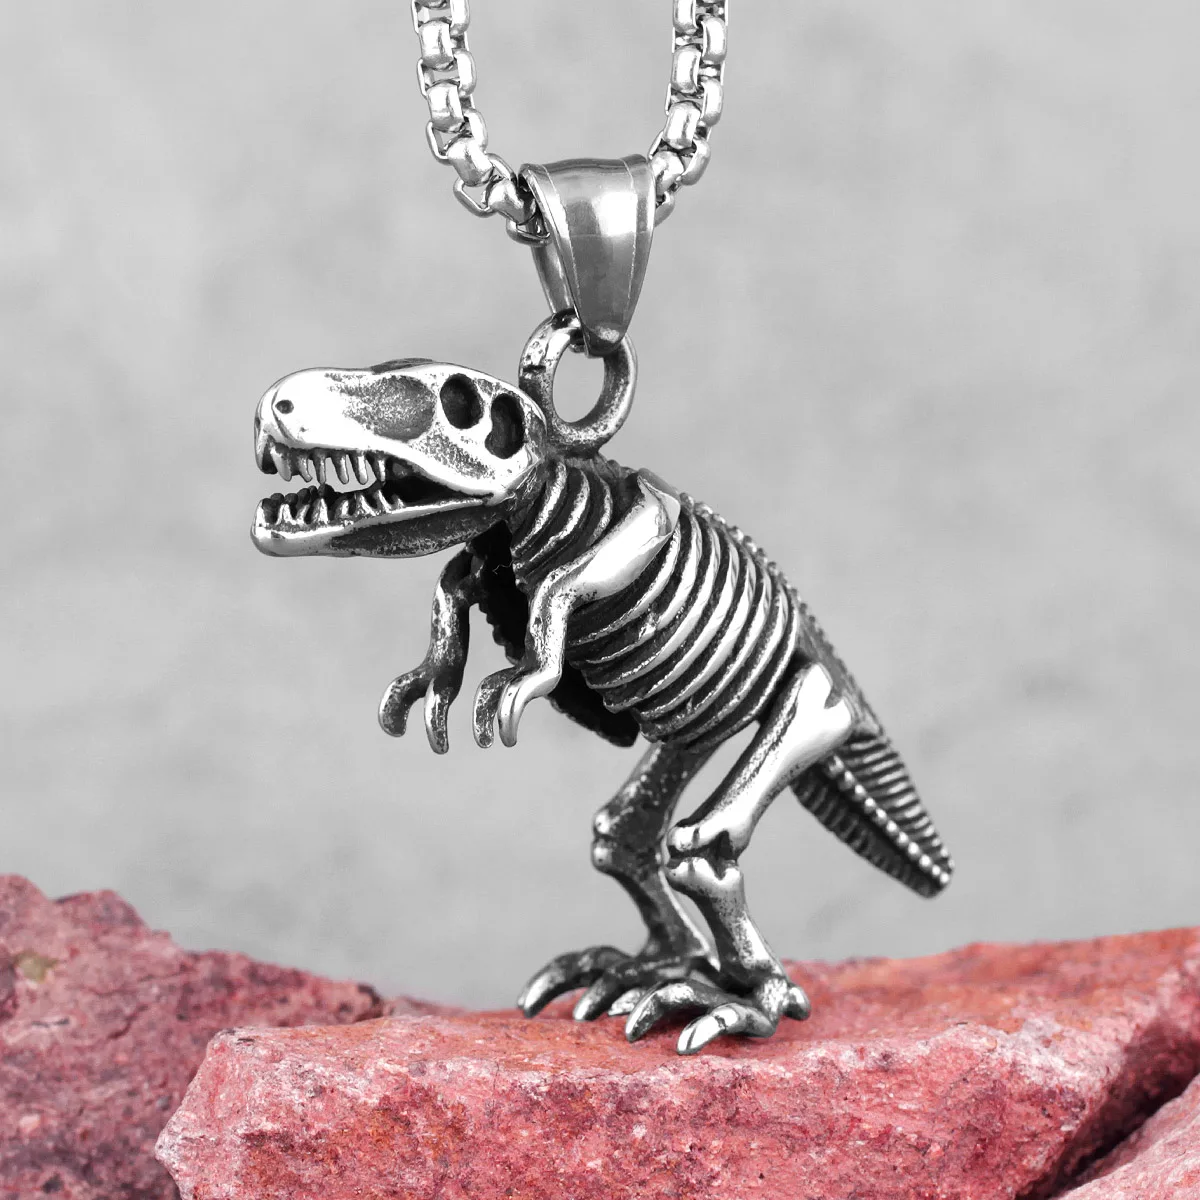 Girls Dinosaur T-Rex Charm Necklace Jewelry Gift,Animal Lover Gifts Pendant for Boys Women